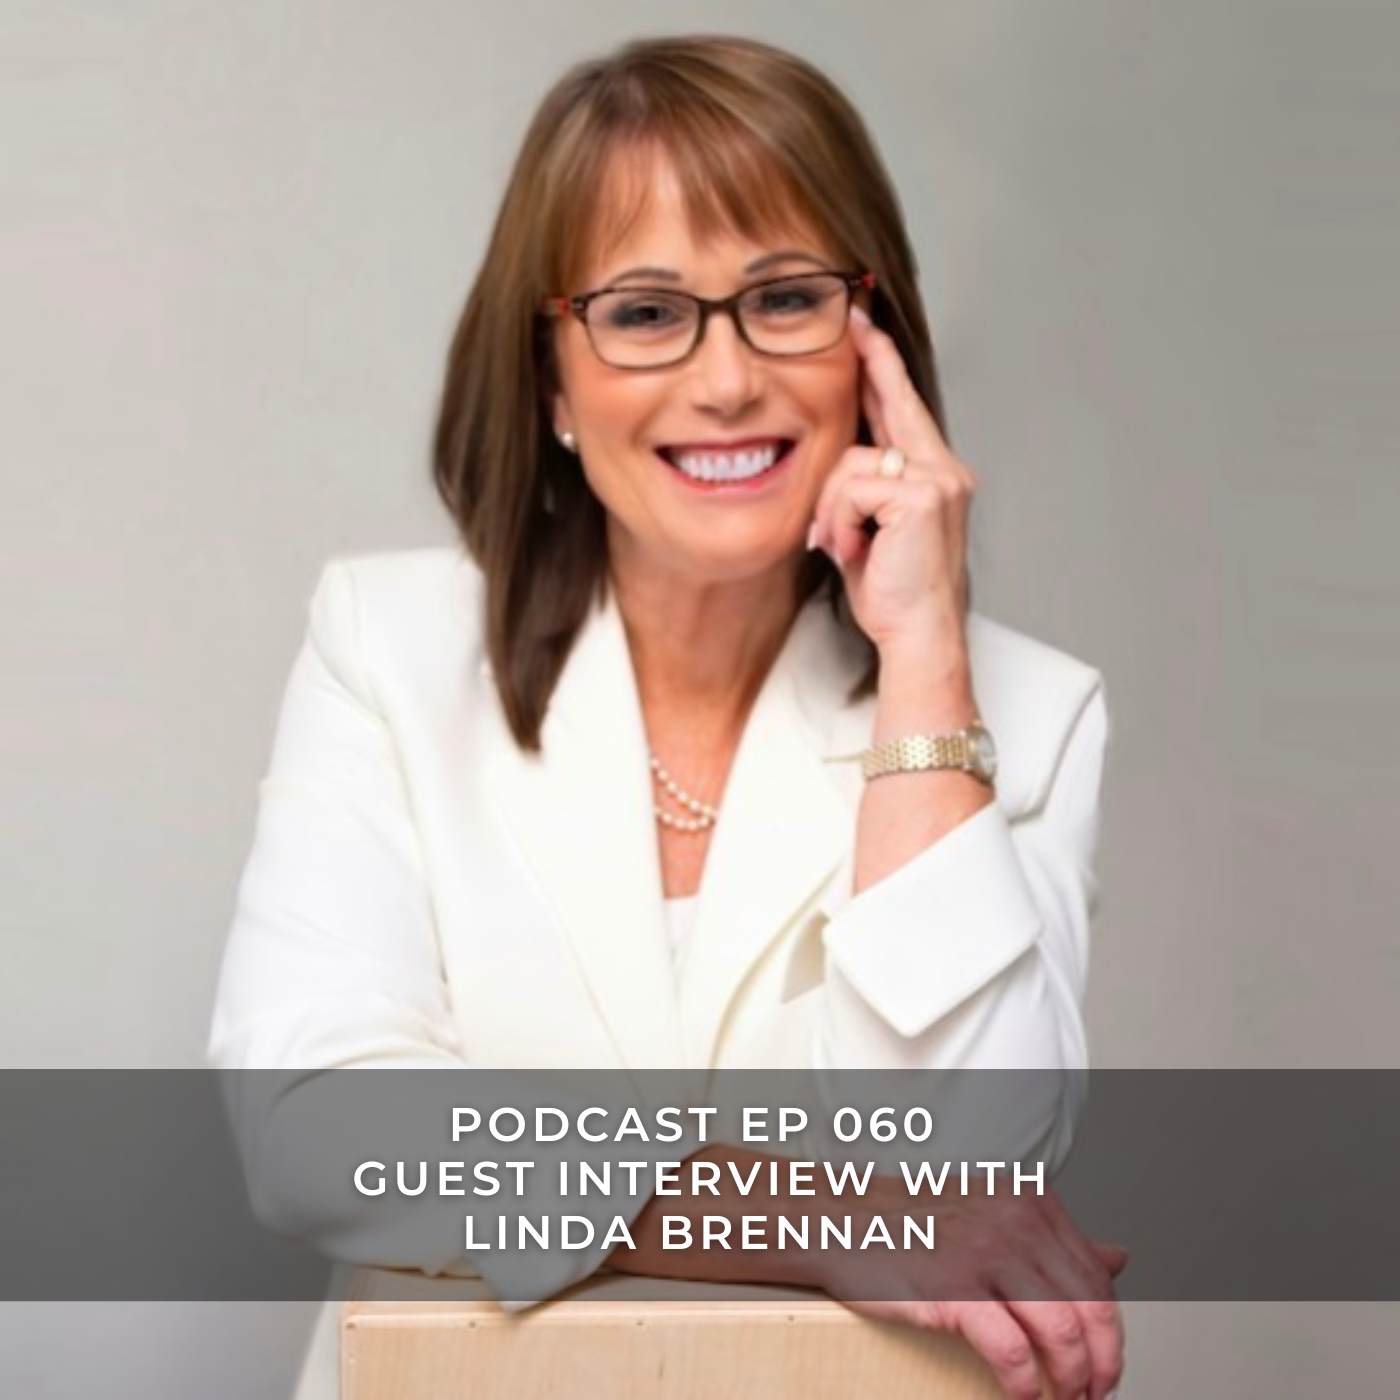 Guest Interview with Linda Brennan